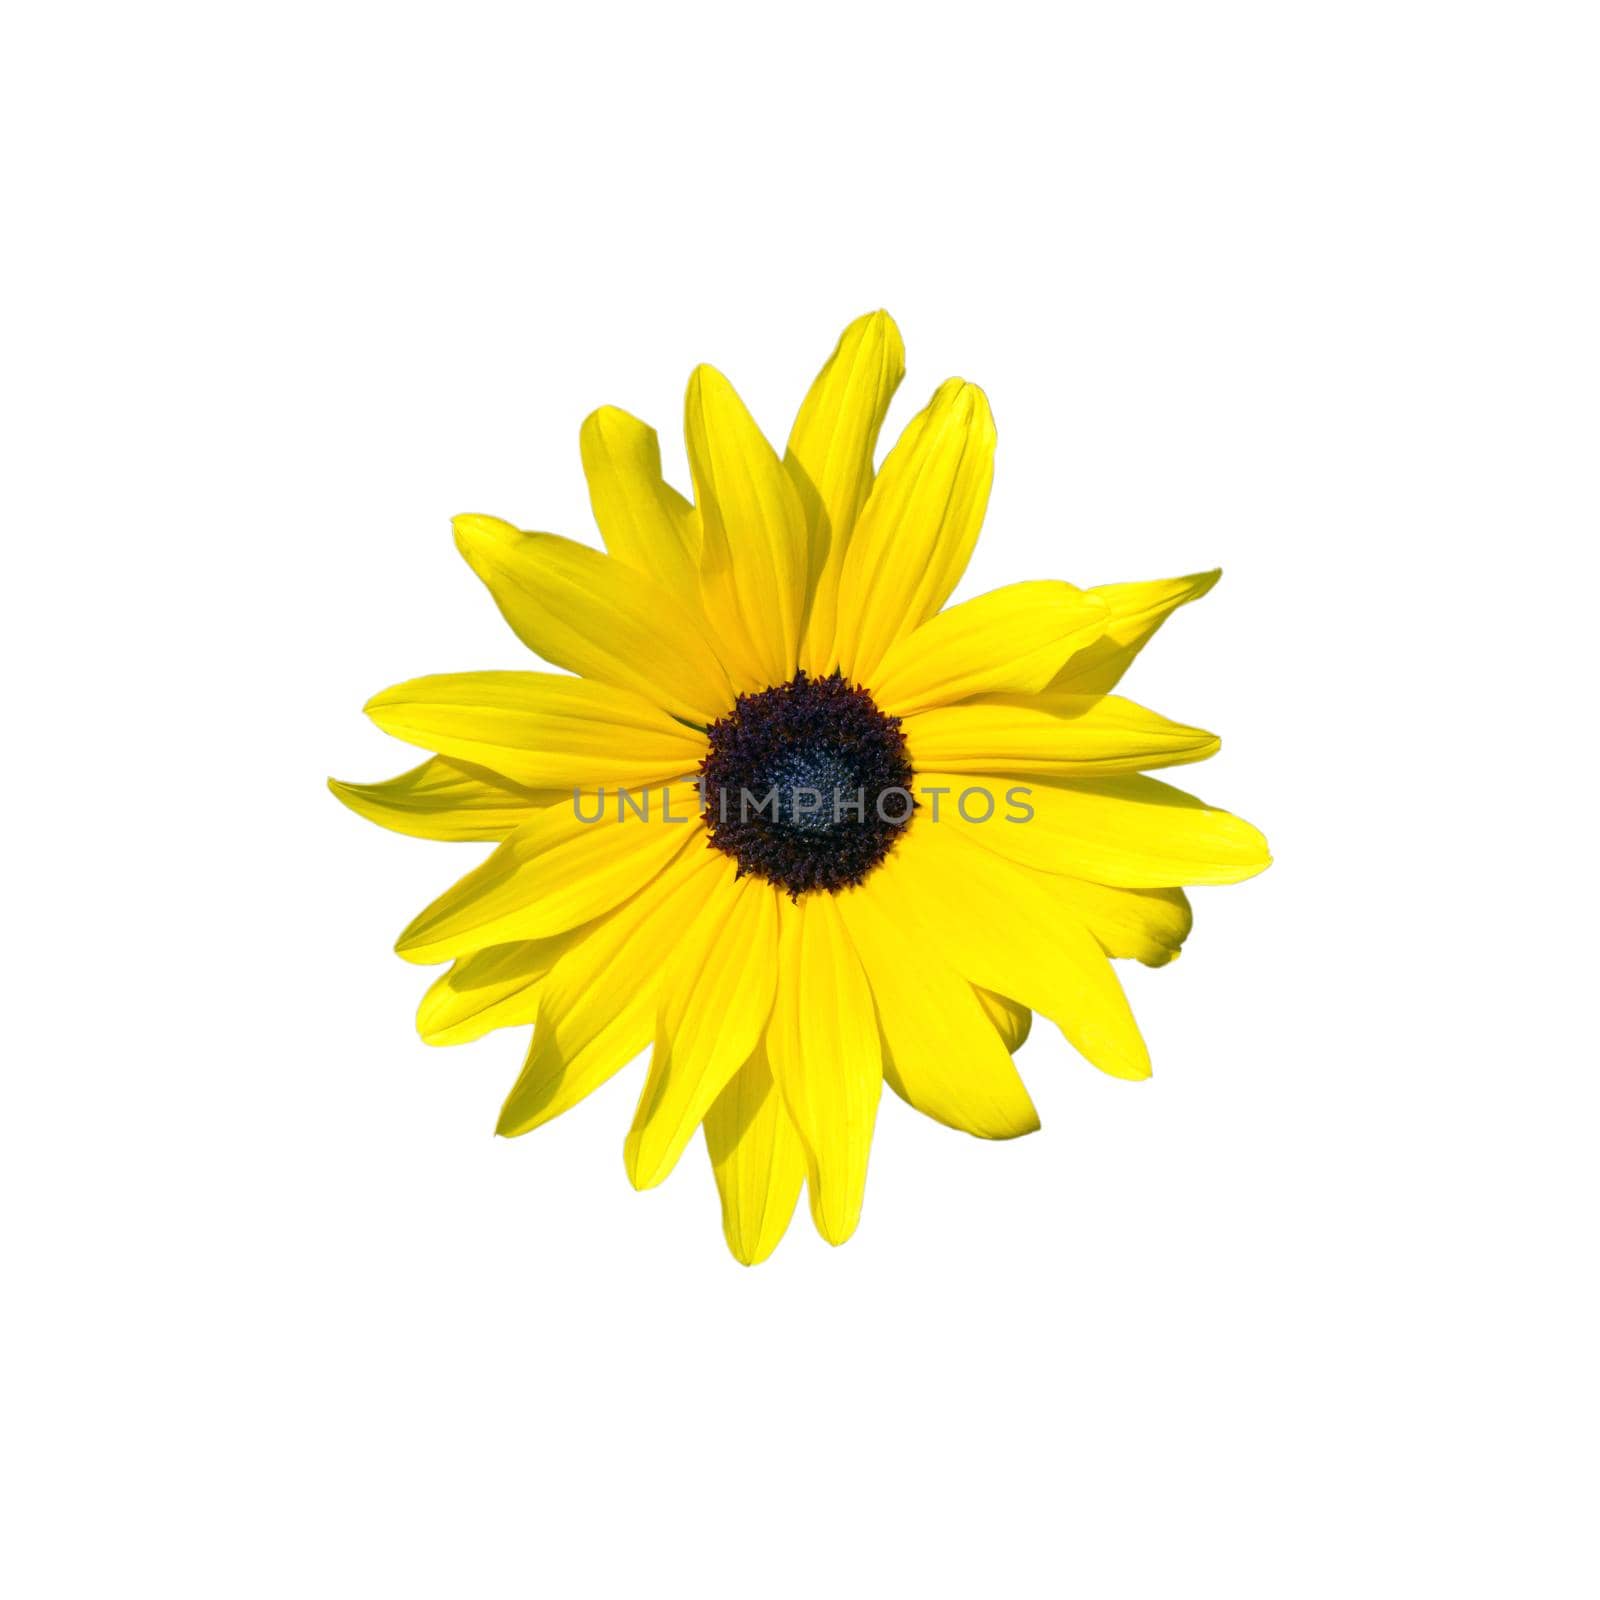 Yellow rudbeckia flower in the garden, isolated on white background.